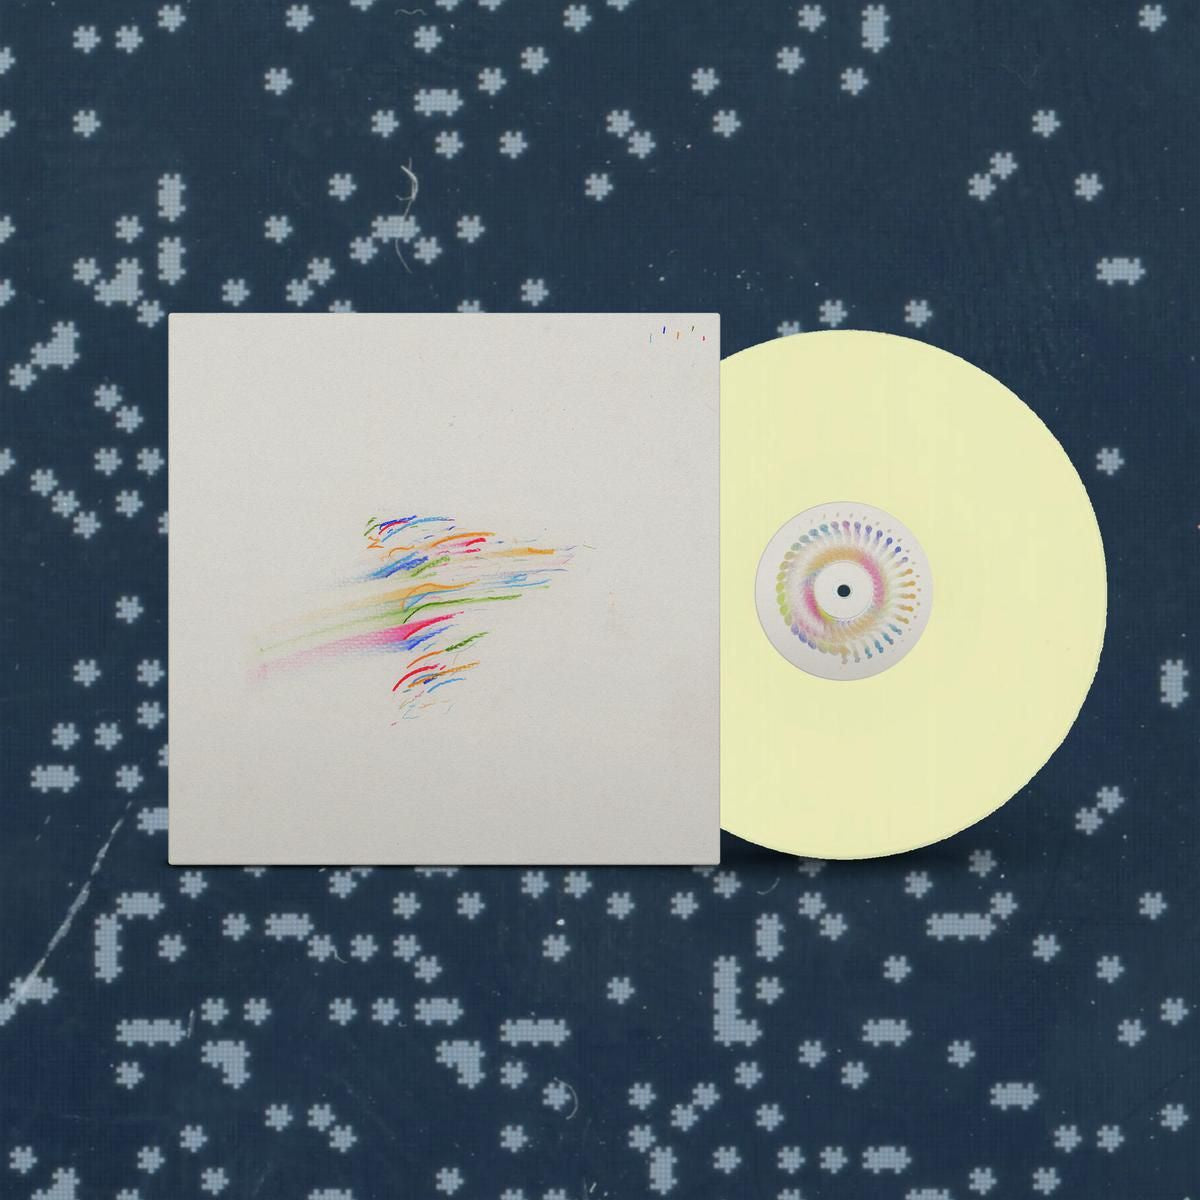 ghost orchard - rainbow music - New LP Record 2022 Winspear Cream Vinyl - Indie Rock / Electronic / Lo-Fi